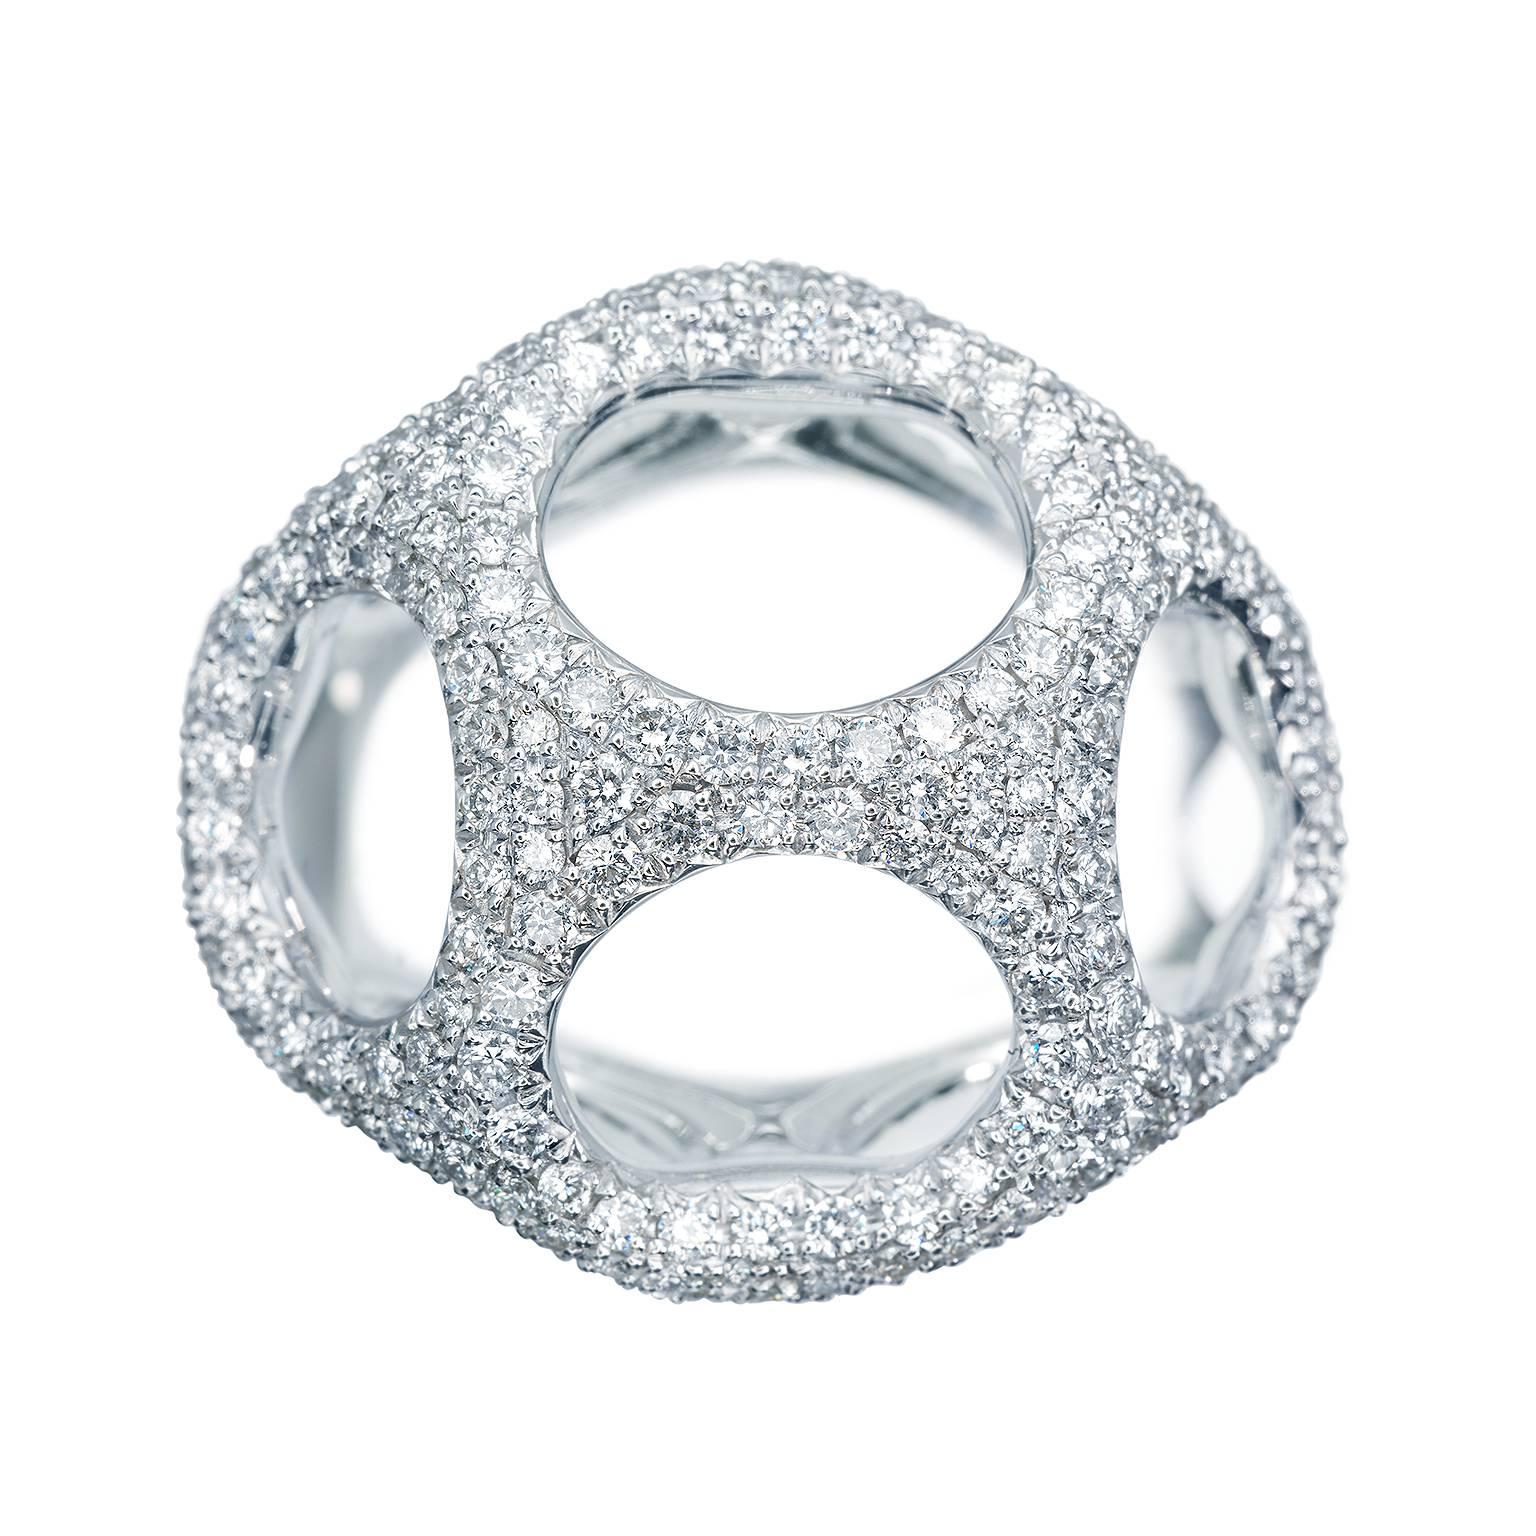 This beautiful pave-set right hand, or cocktail, 18 Karat white gold and diamond ring designed by Towe Norlen in 2008, has 256 hand set Top Wesselton (TW vvs) high quality diamonds. In total 2.15 Carats. The ring reaches at the highest point 14 mm